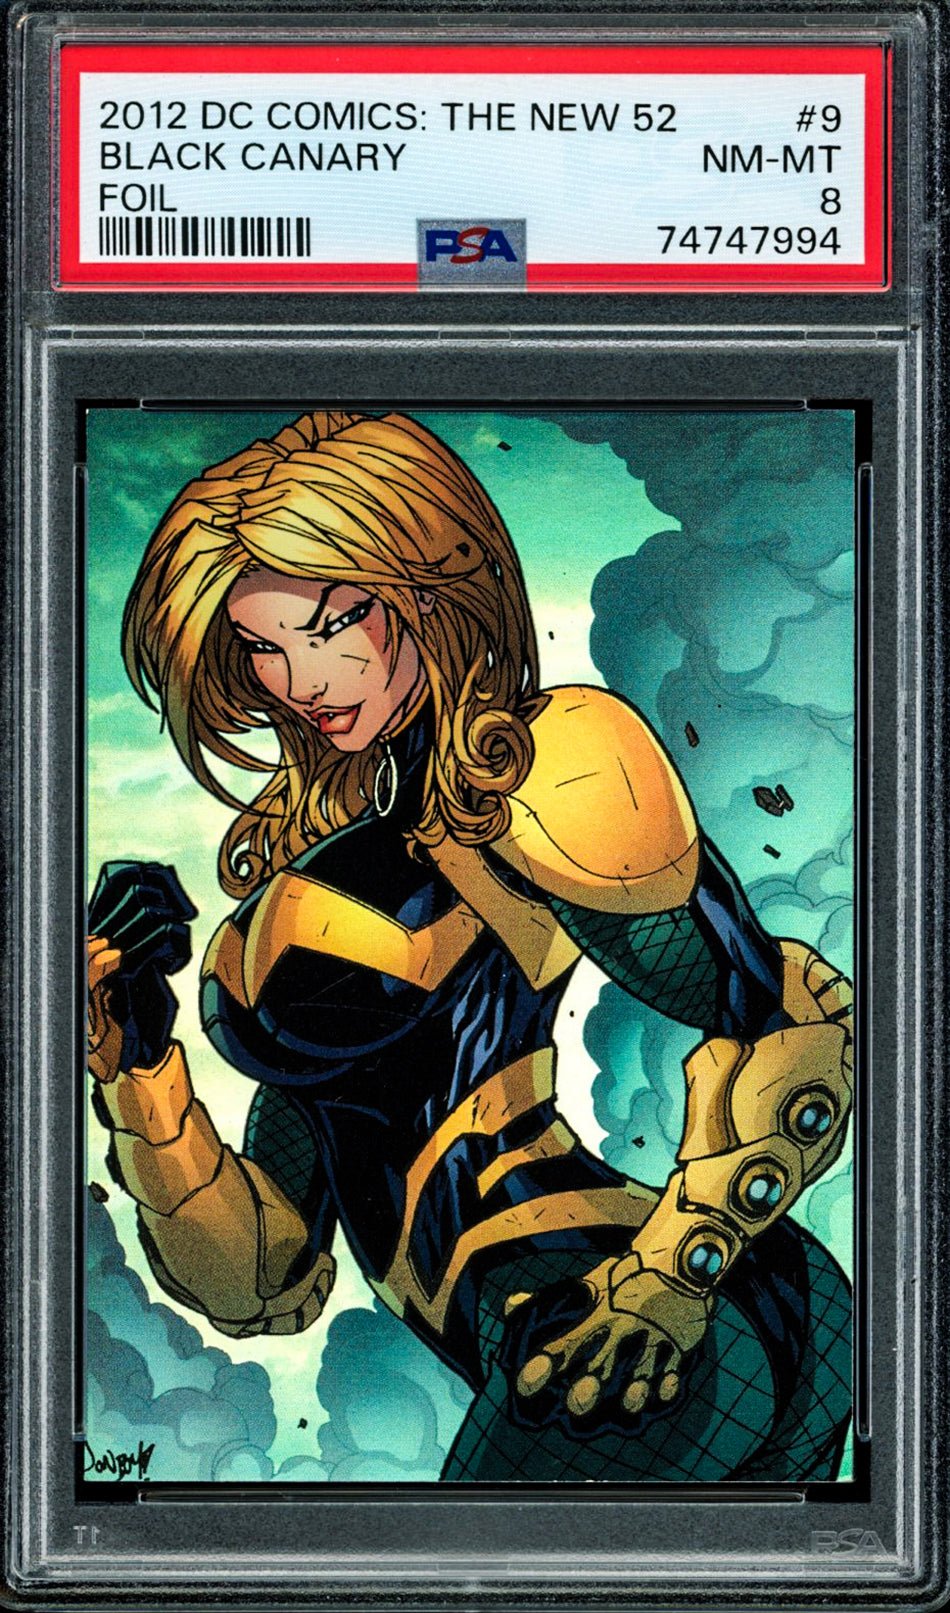 BLACK CANARY PSA 8 2012 DC Comics The New 52 Foil #9 DC Comics Graded Cards Parallel - Hobby Gems